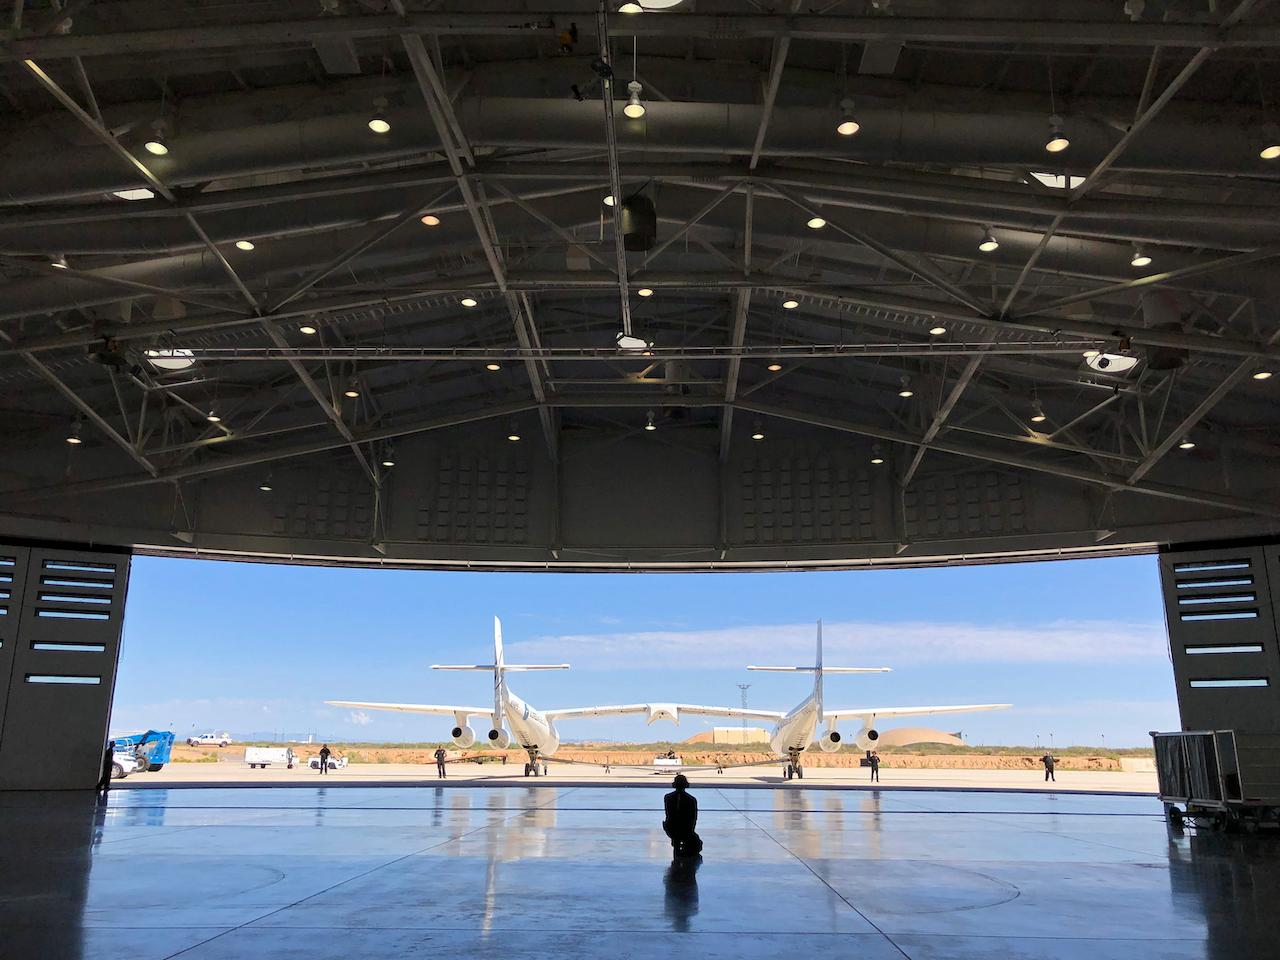 Virgin Galactic ground crew guide a carrier plane into the hangar at Spaceport America following a test flight over the desert near Upham, New Mexico, Aug 15, 2019. Virgin Galactic is one of two companies building spacecraft capable of sending private clients on suborbital flights to the edge of space lasting several minutes. Photo: AP